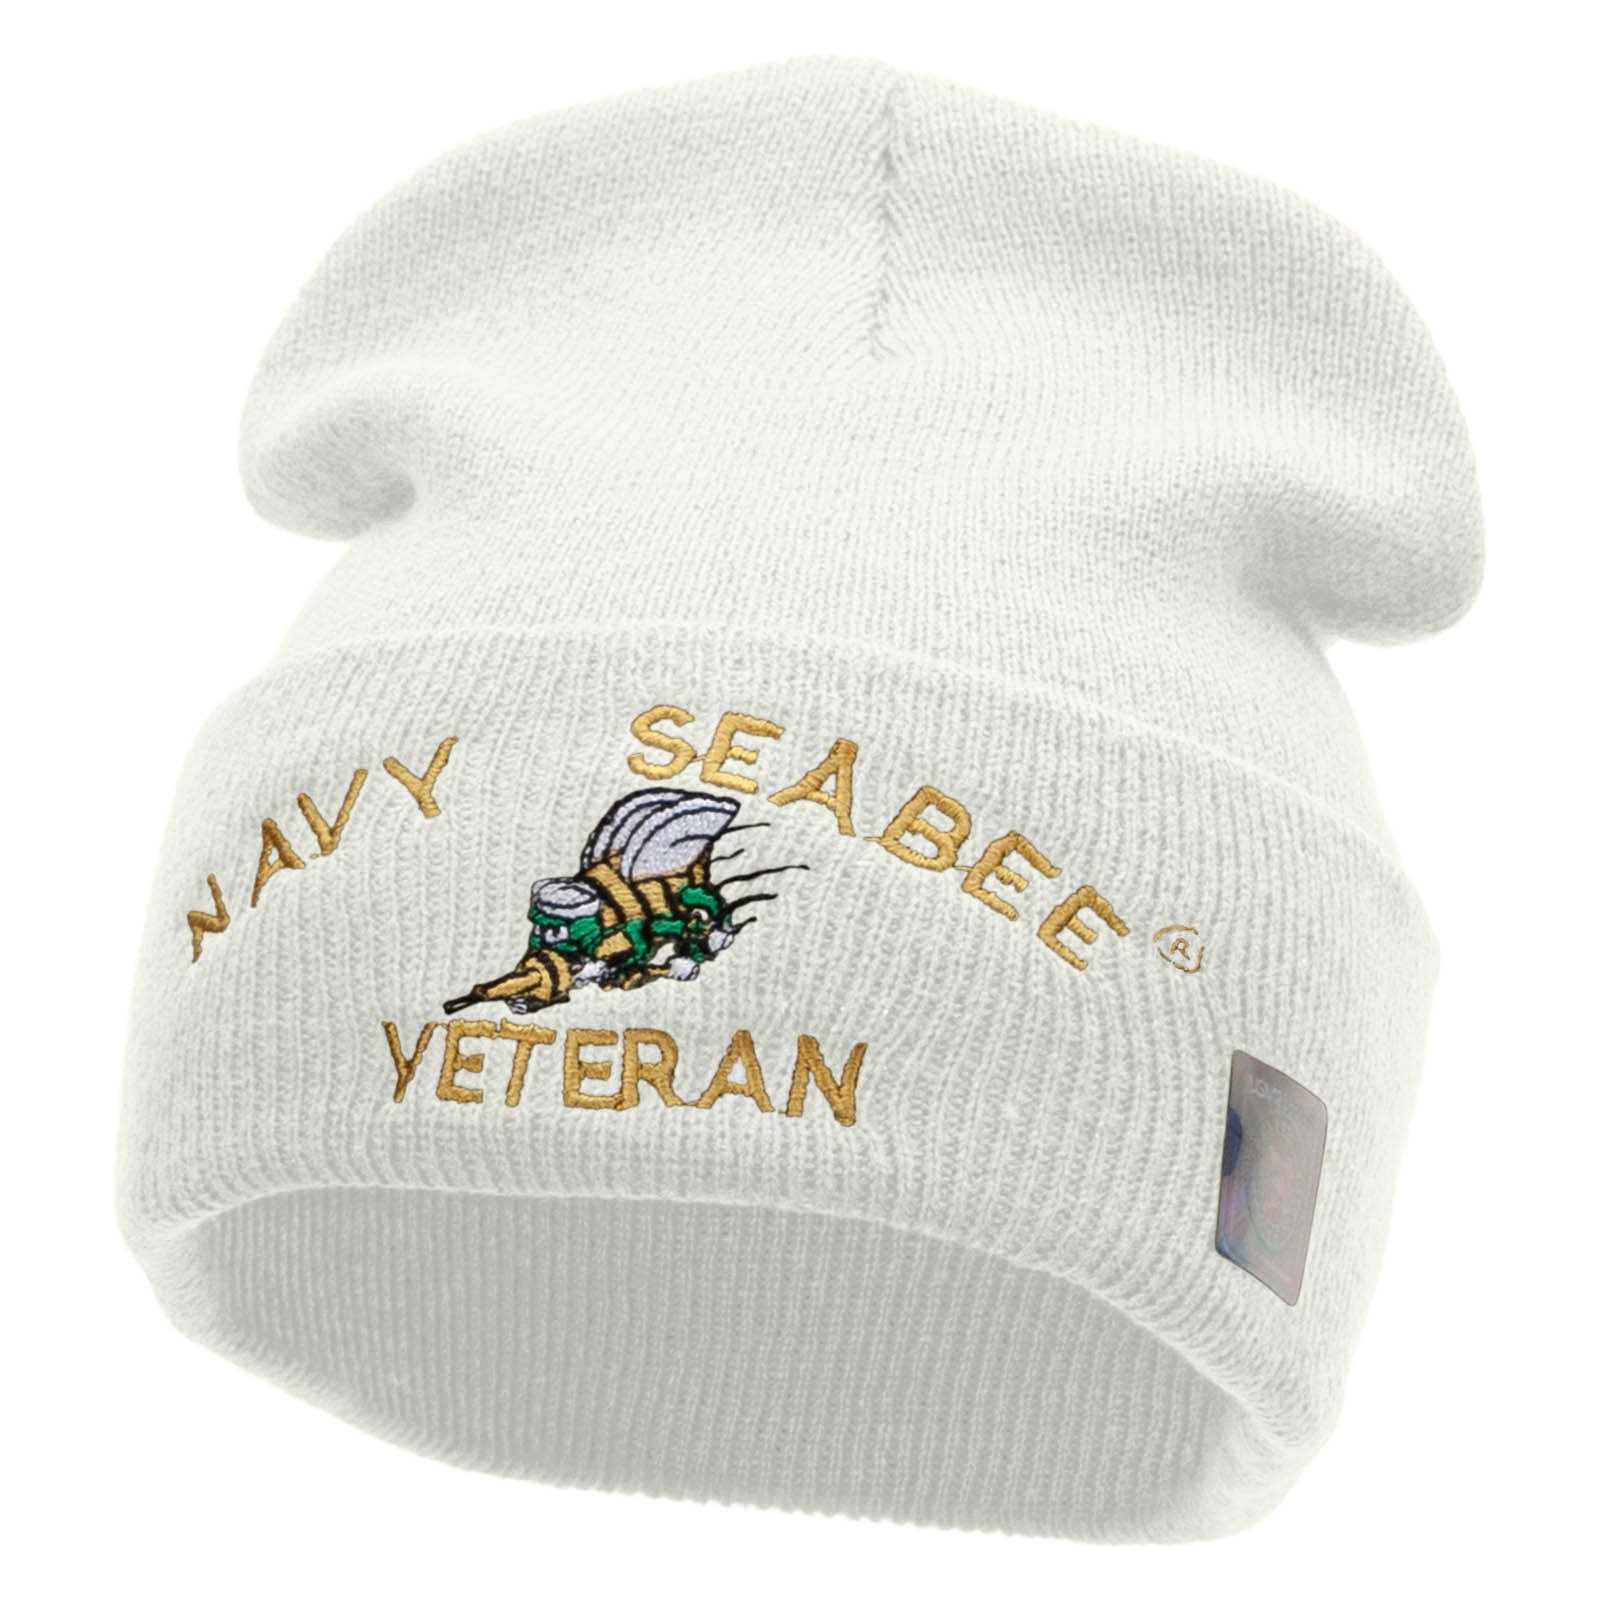 Licensed US Navy Seabee Veteran Military Embroidered Long Beanie Made in USA - White OSFM